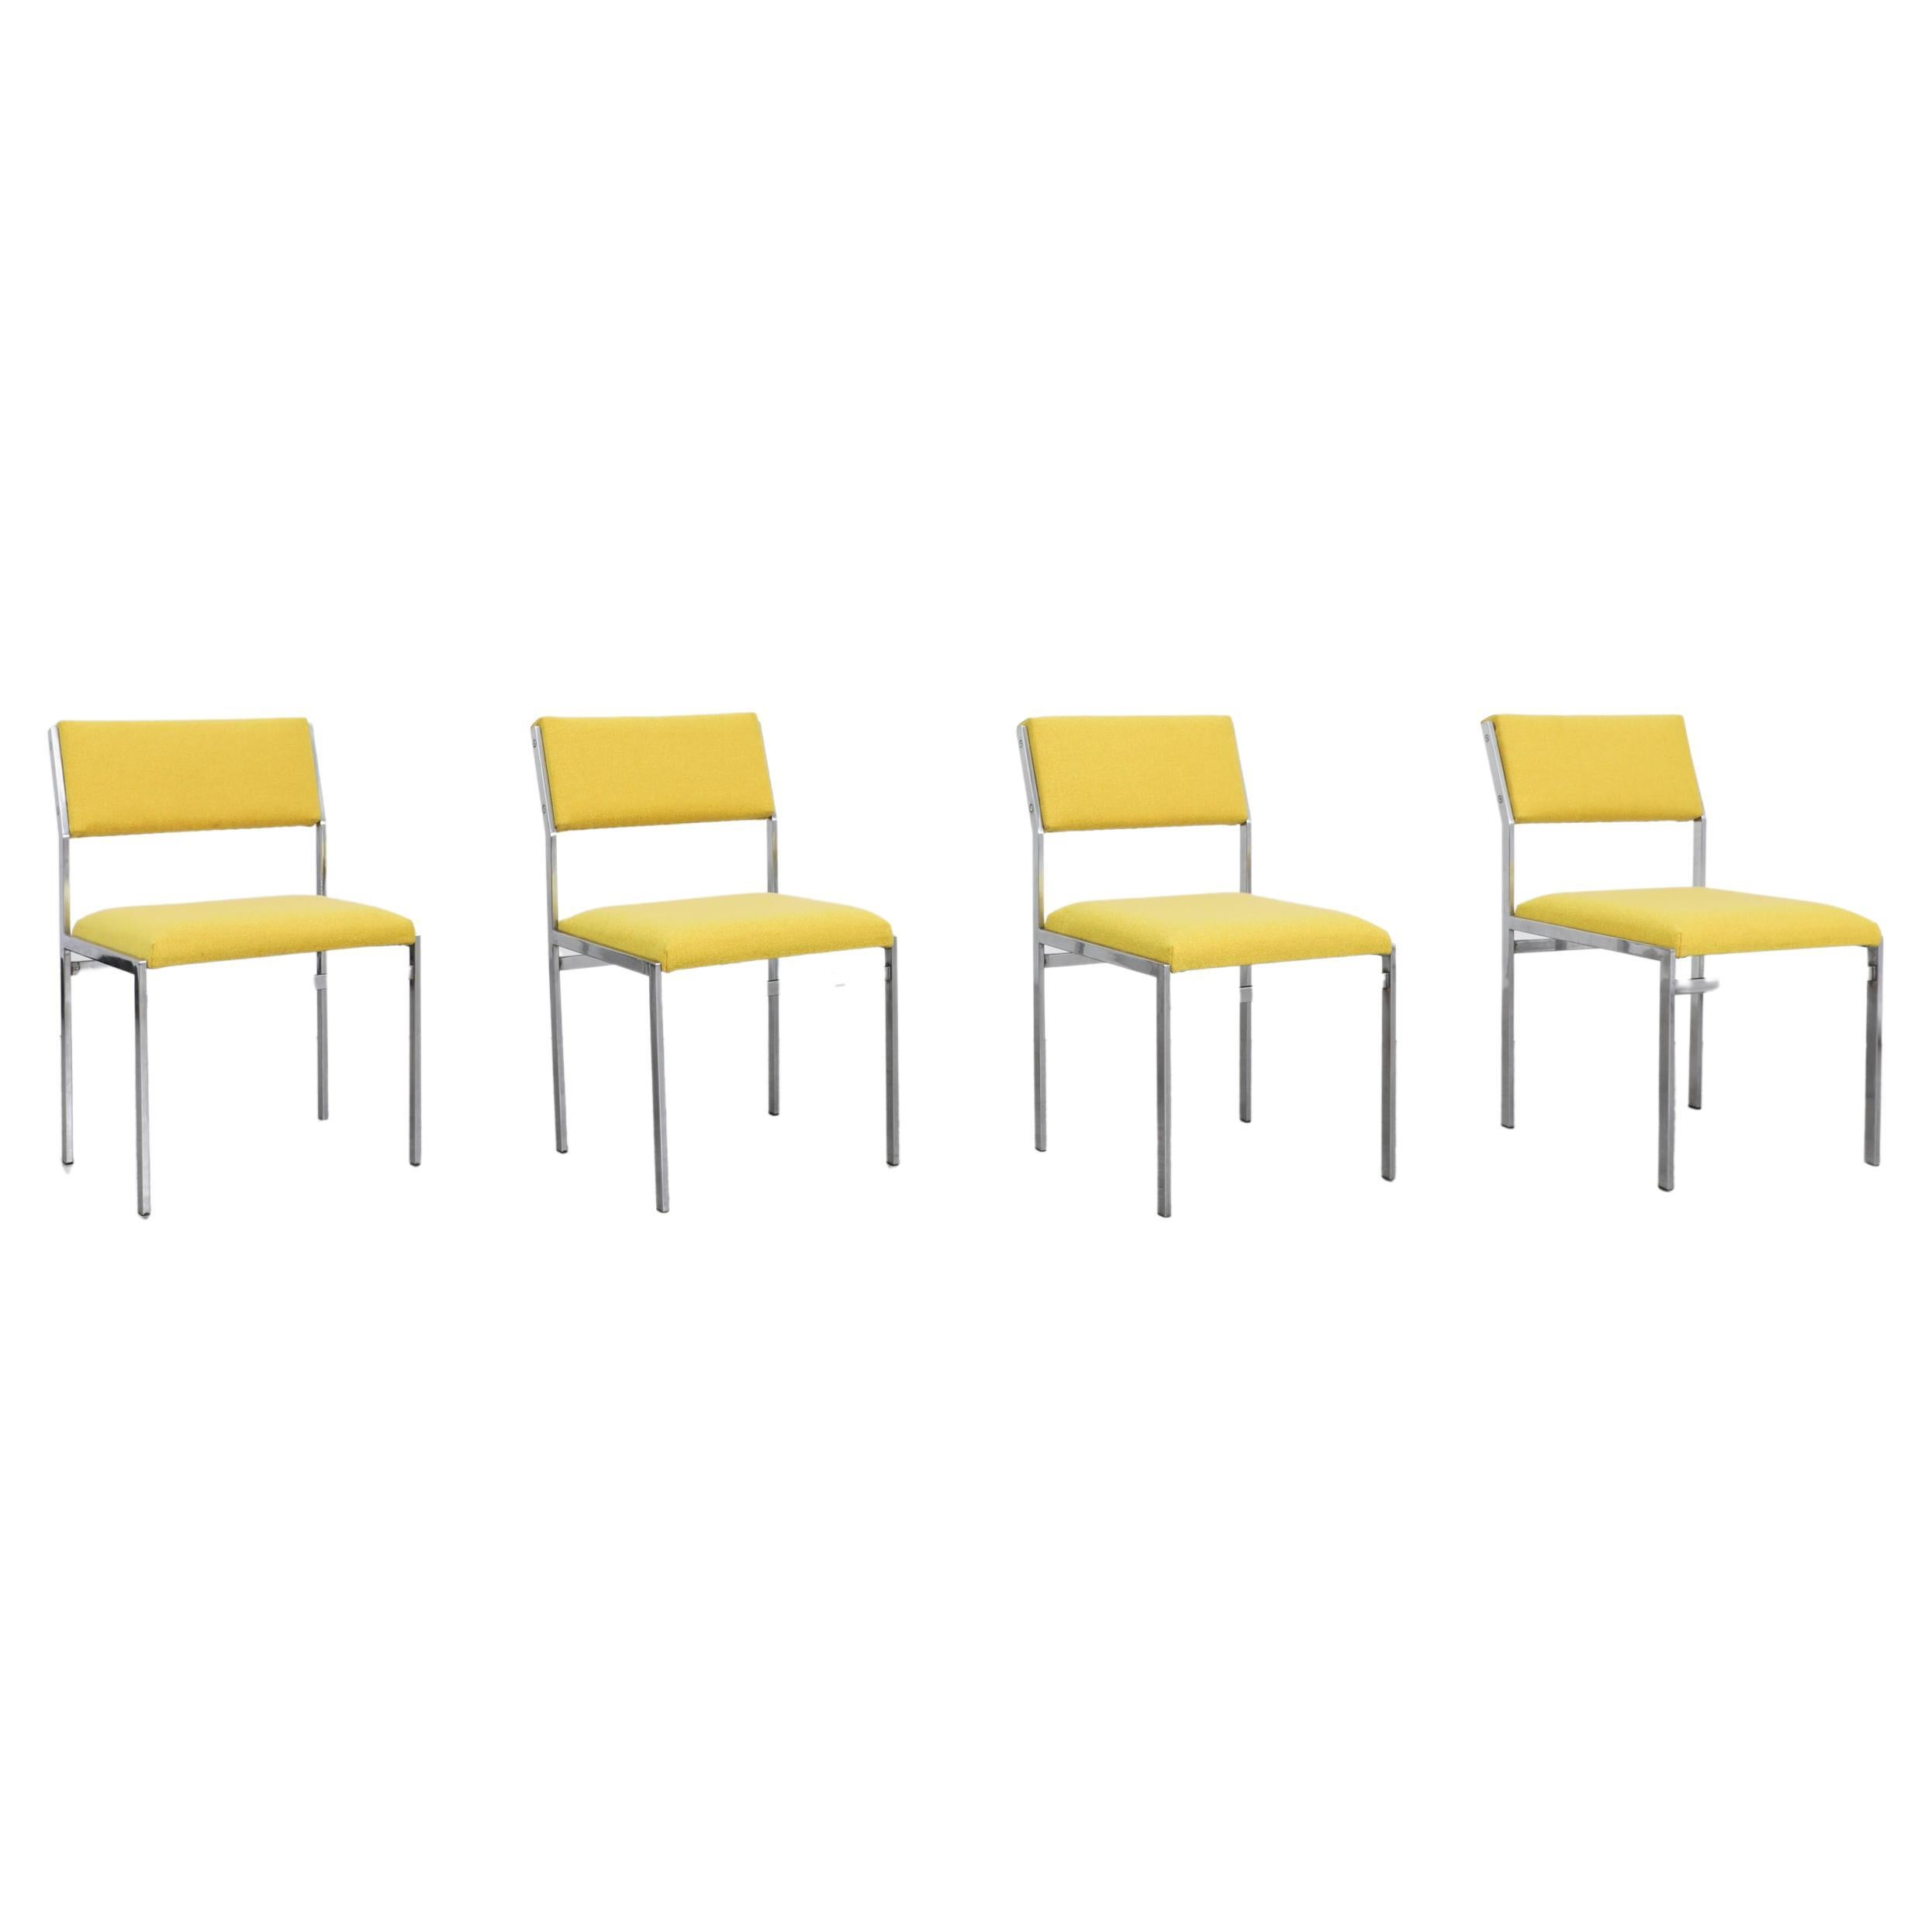 Set of 4 Cees Braakman Chairs for Pastoe with Chrome Frames in Sunshine Yellow